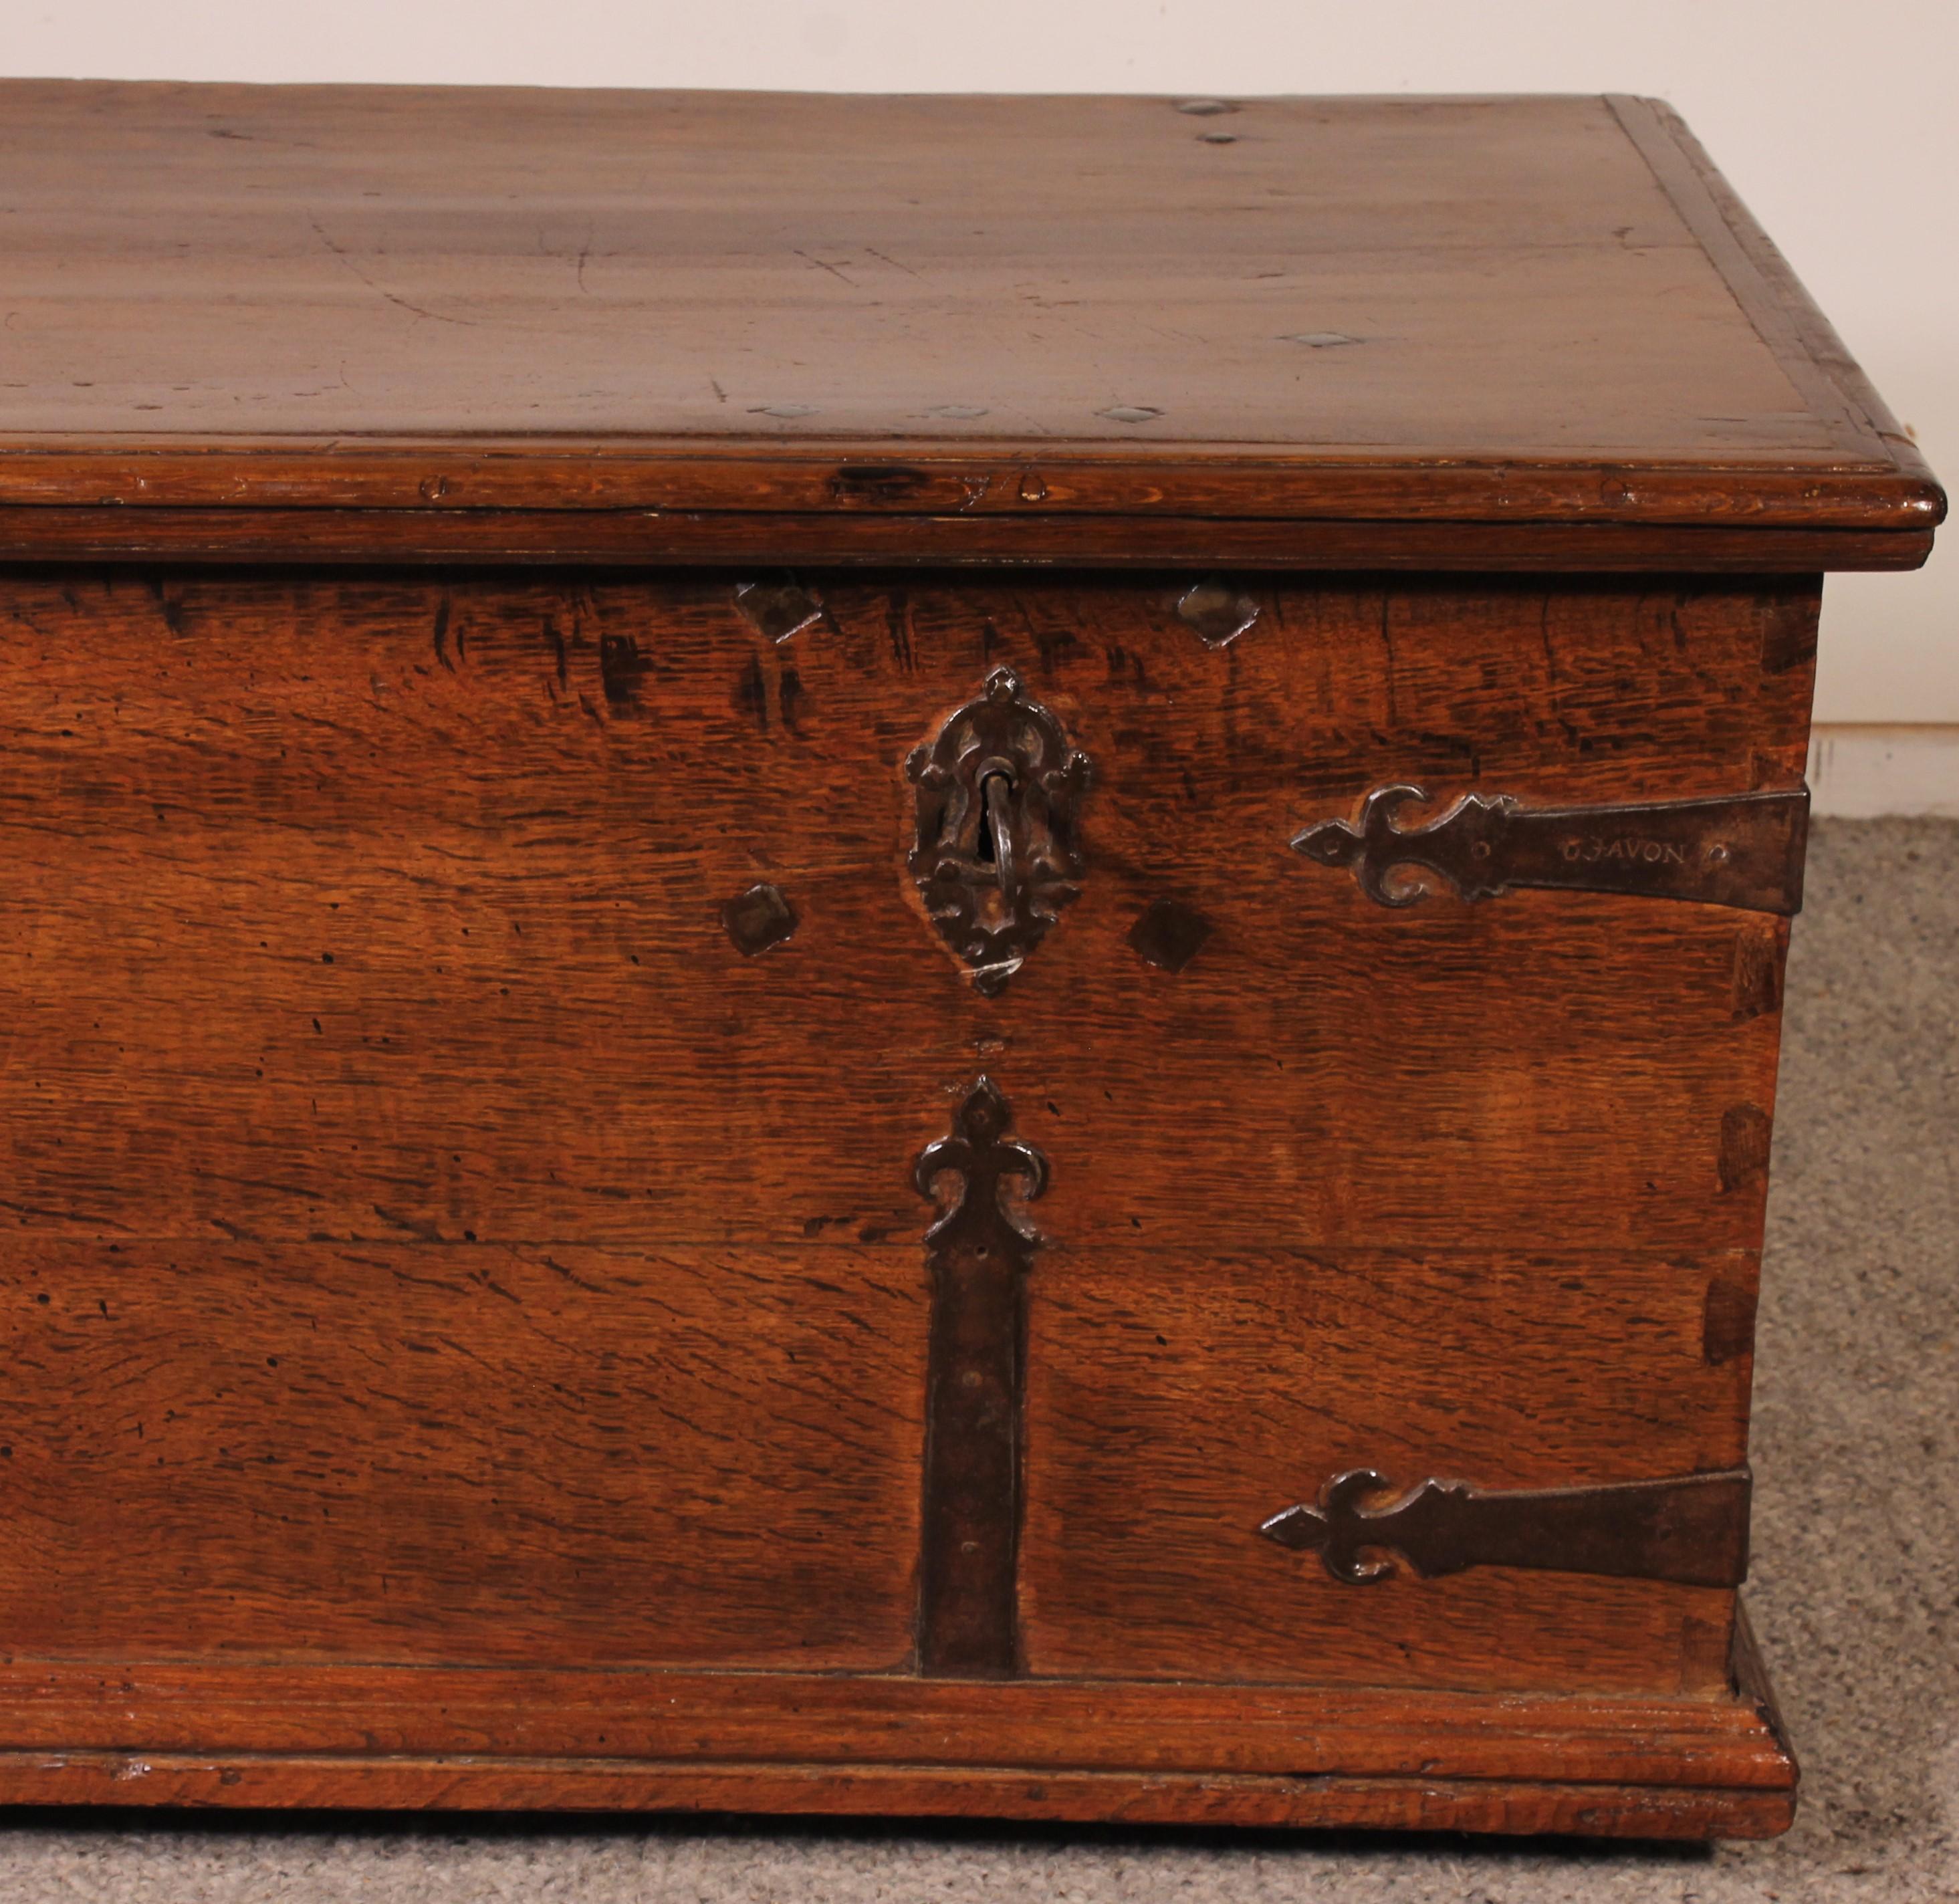 superb 17th century oak chest with double locks and very beautiful irons.
Double-locked safes are rare. Indeed, at the time they were used to keep important documents in villages or small towns. Two people had the keys to open the safe and it was